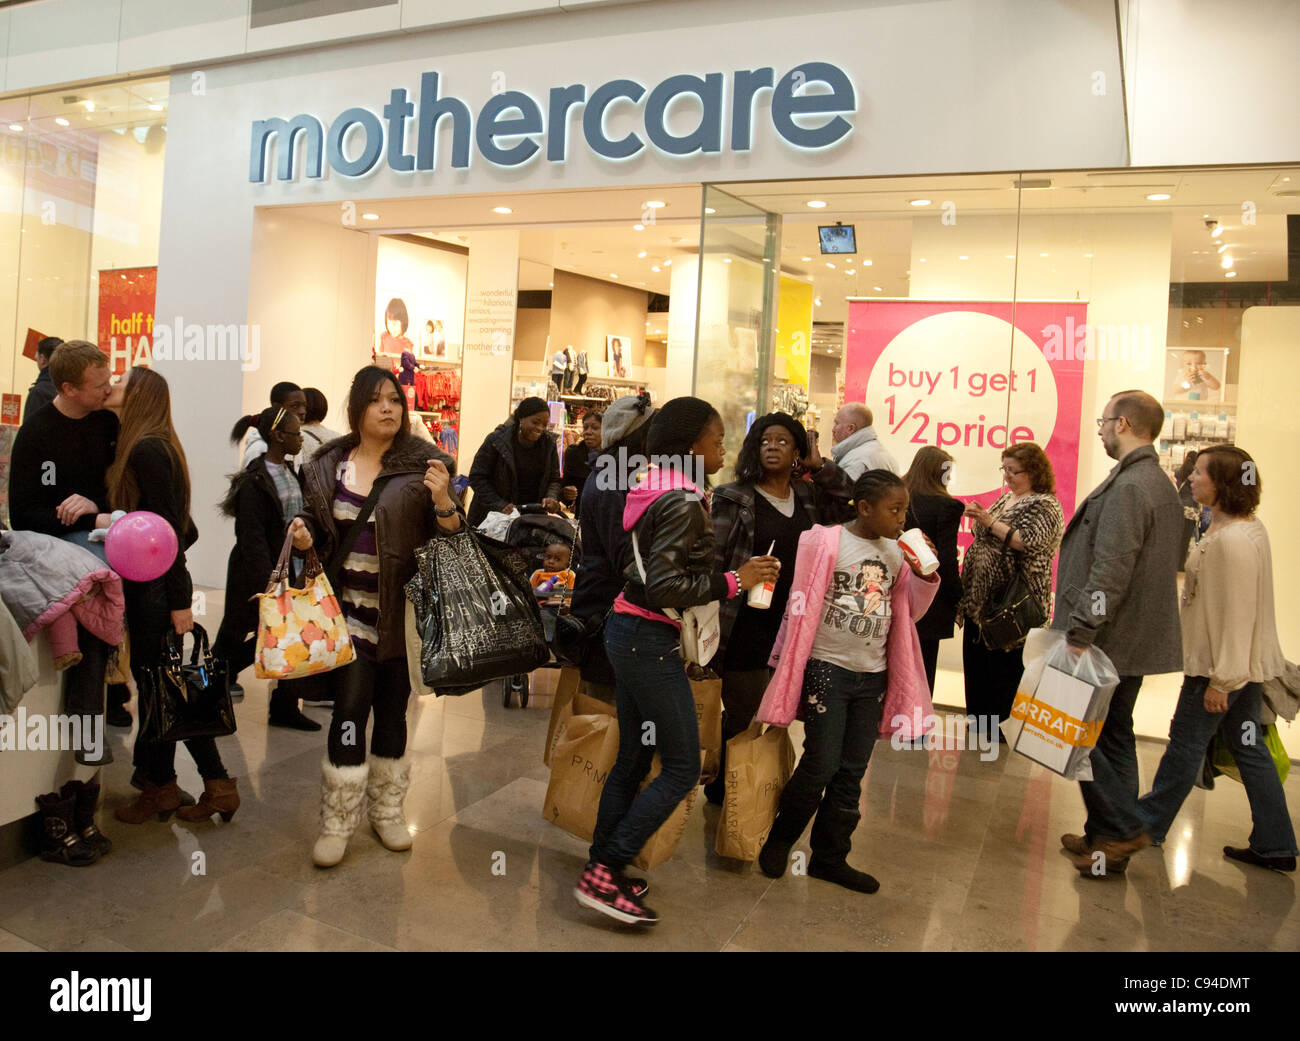 Mothercare store, Westfield shopping centre Stratford london UK Stock Photo